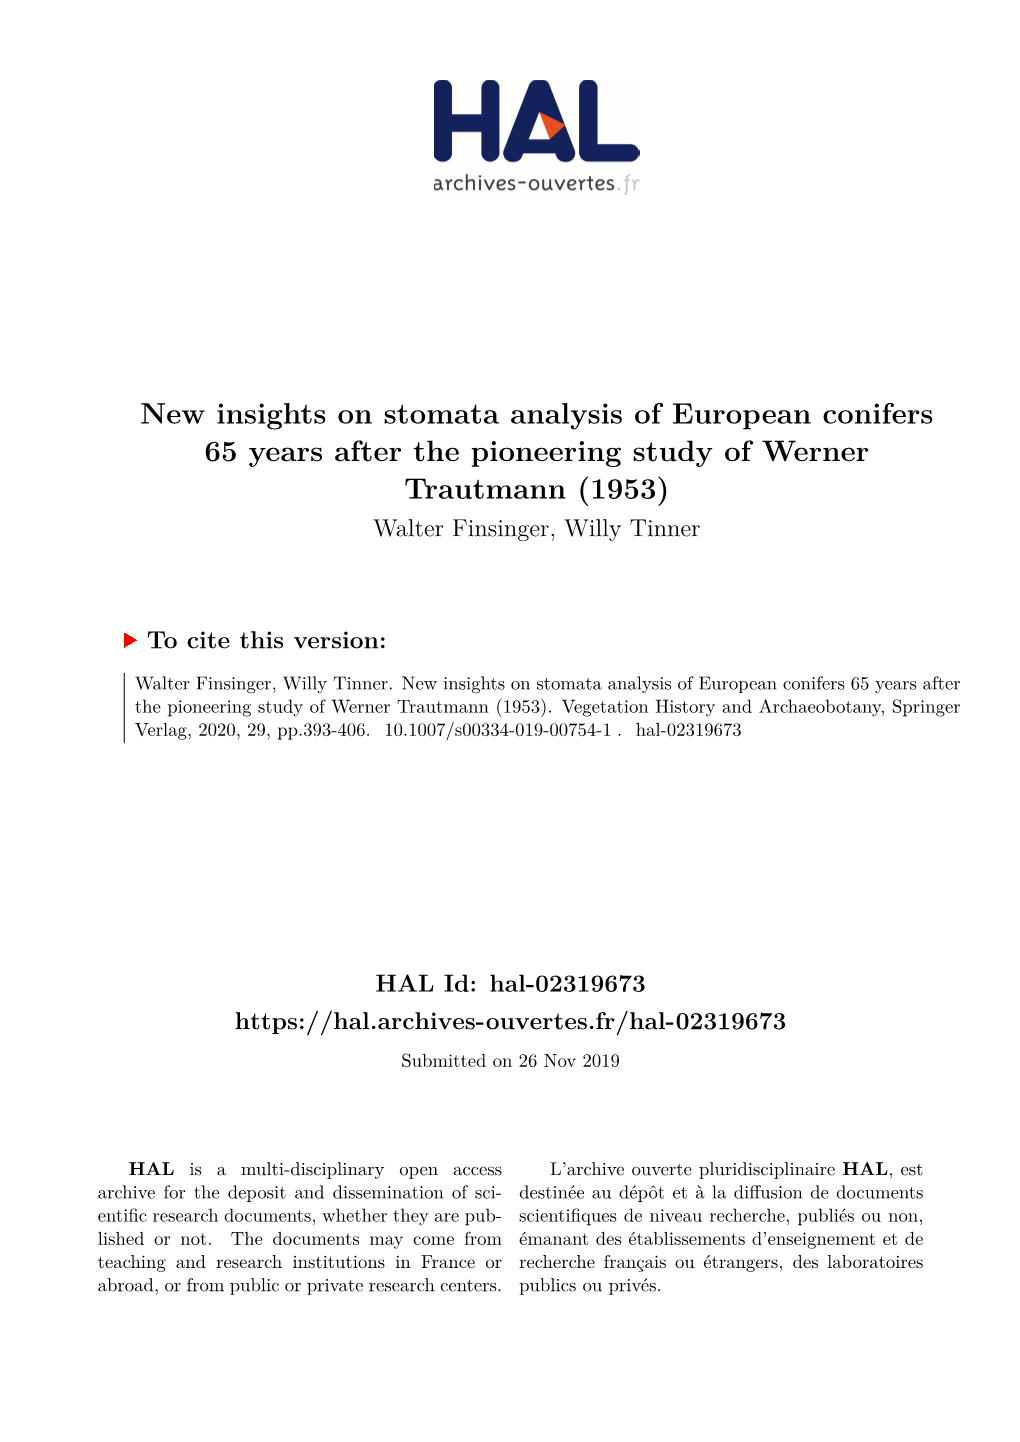 New Insights on Stomata Analysis of European Conifers 65 Years After the Pioneering Study of Werner Trautmann (1953) Walter Finsinger, Willy Tinner